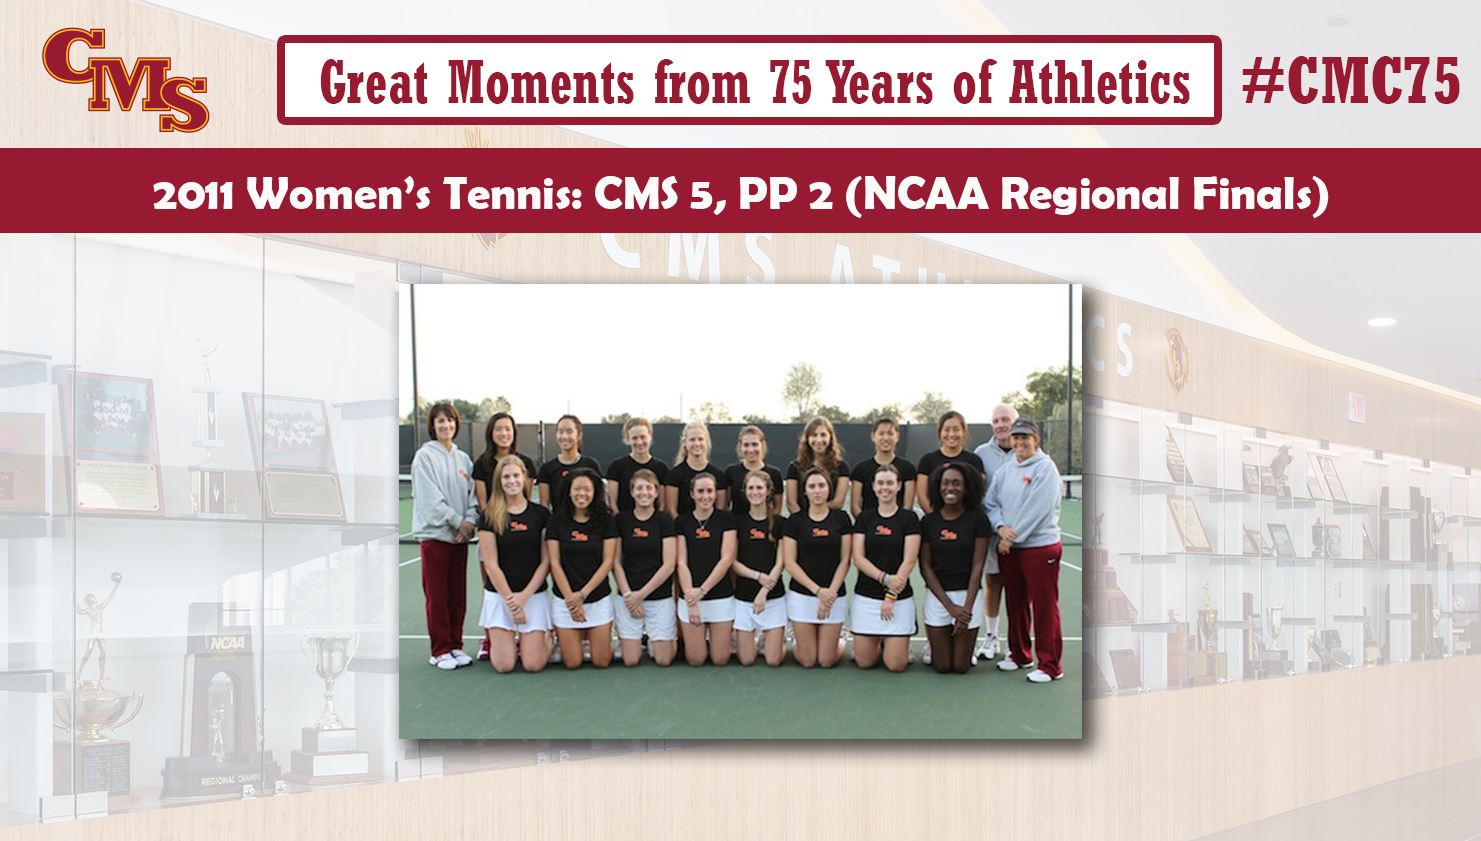 Team shot of the 2011 women's tennis team. Words over the photo read: Great Moments from 75 Years of Athletics, 2011 Women's Tennis: CMS 5, PP 2 (NCAA Regional Finals)